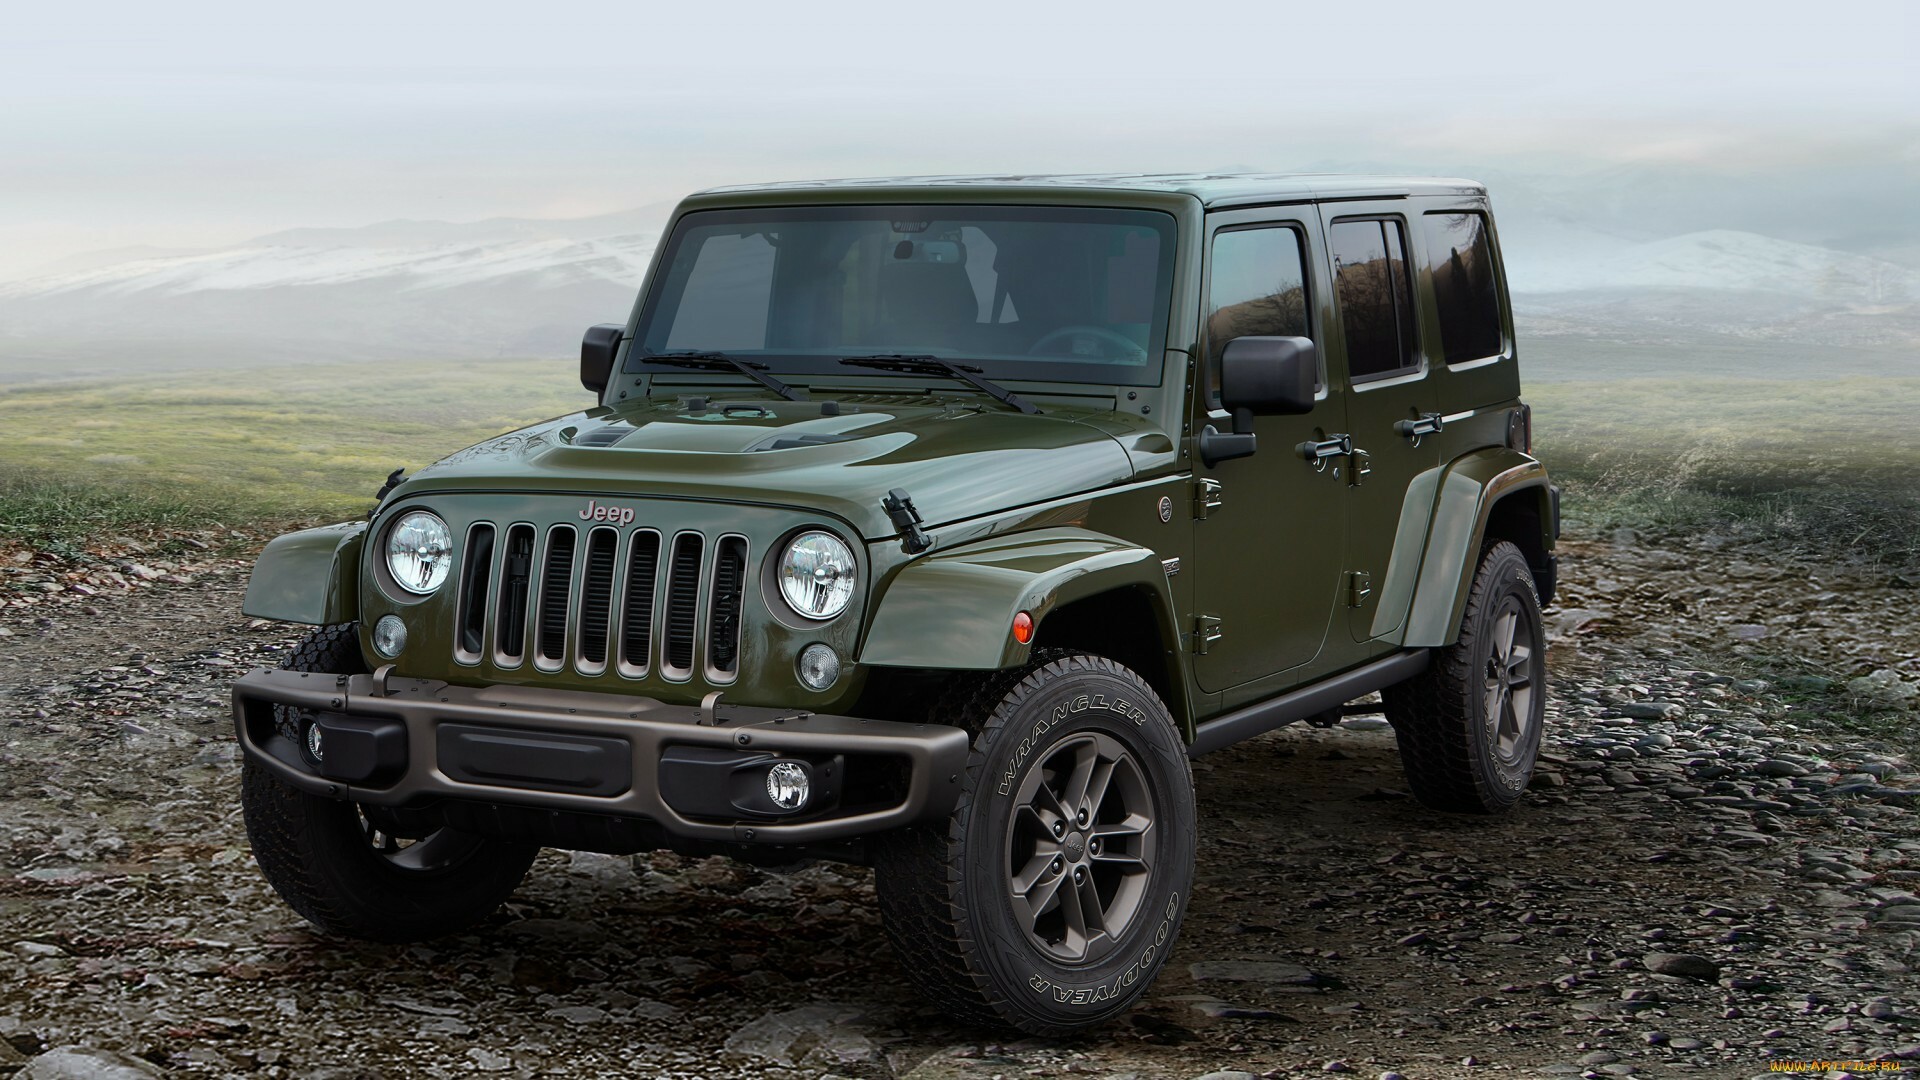 Jeep Wrangler: The JK generation was unveiled at the 2006 North American International Auto Show in Detroit. 1920x1080 Full HD Background.